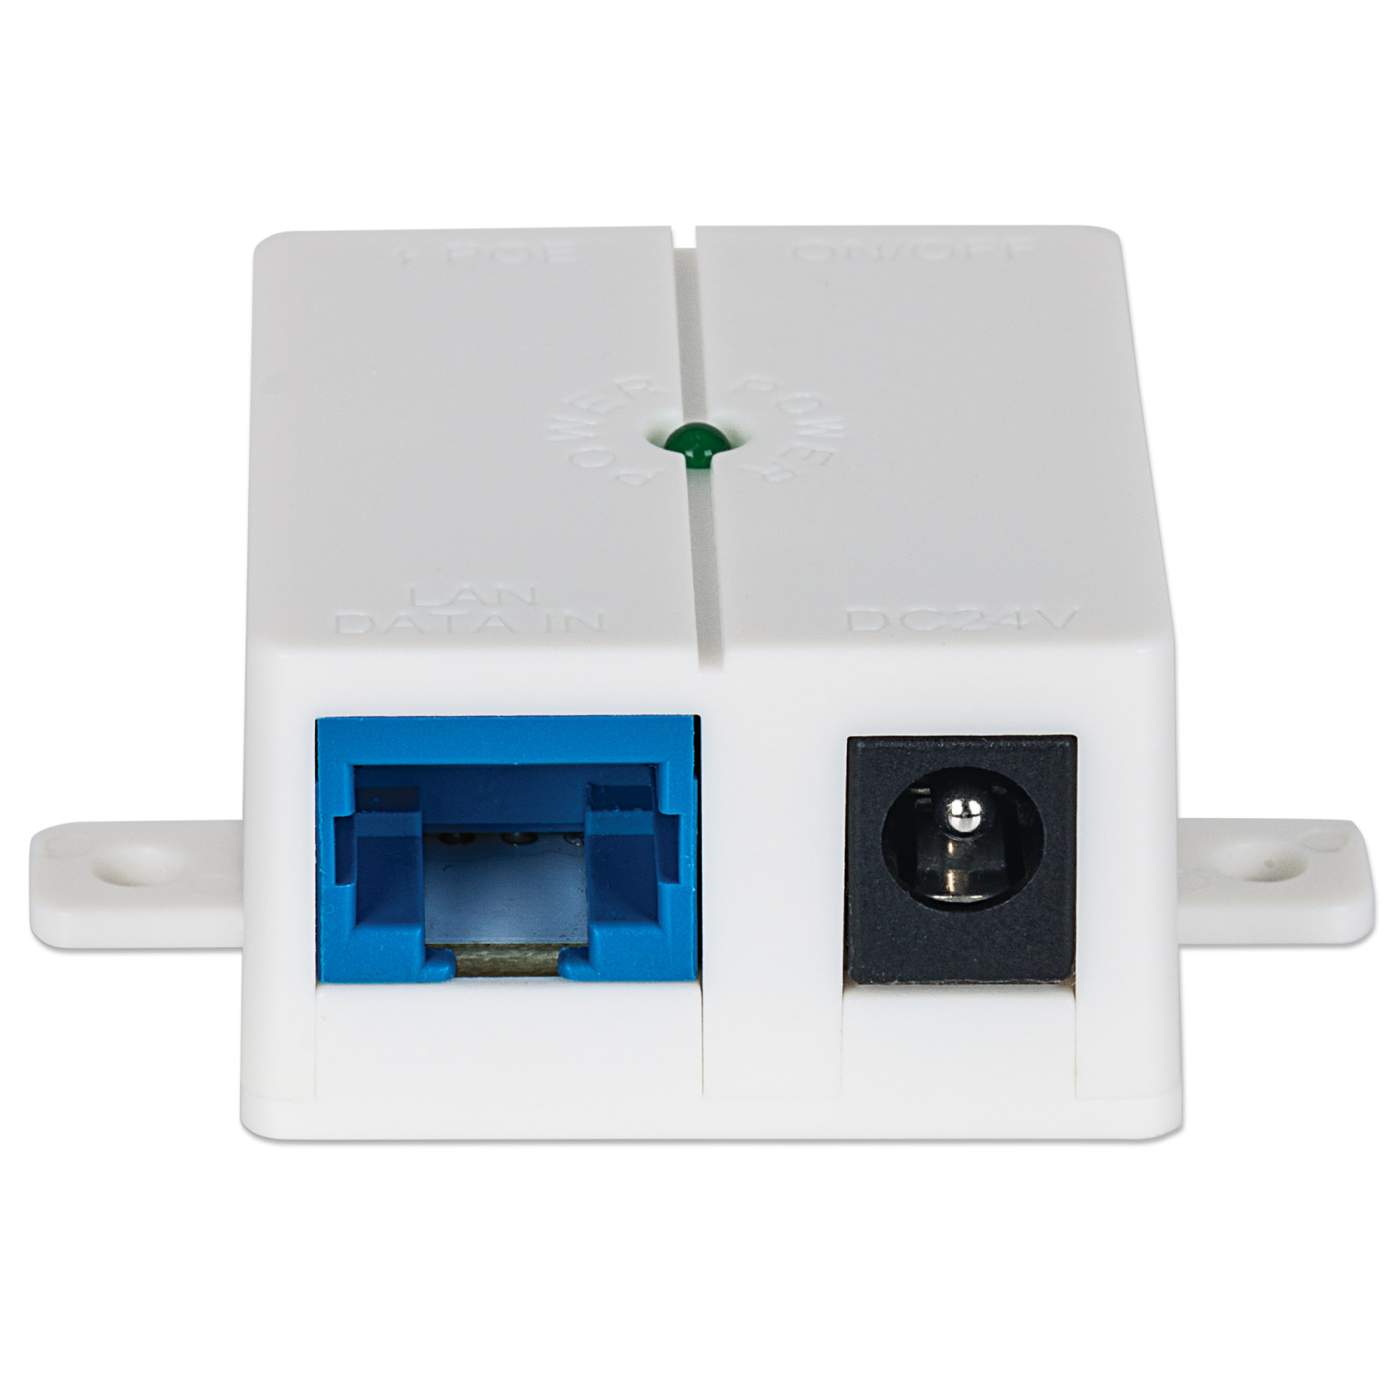 High-Power Wireless AC600 Dual-Band Outdoor Access Point Image 9